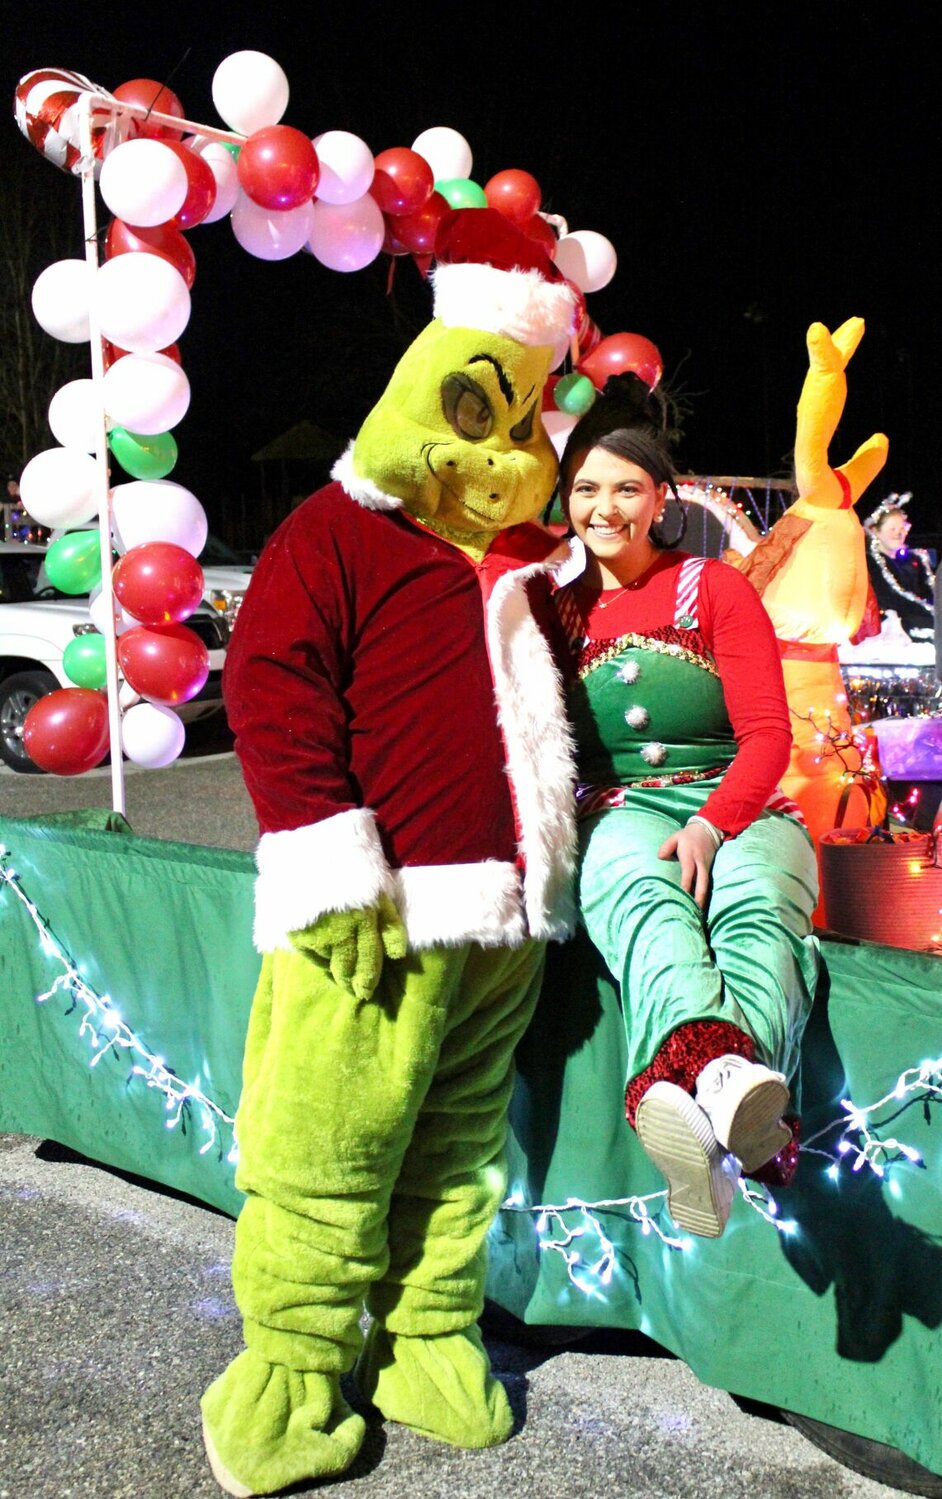 Willow Care Nursing Home entered this "Grinch" float in the movie-themed Willow Springs Christmas Parade Saturday evening. Kyle Dodson is costumed as the mean one himself and Makenzie Smith joined him as Cindy Lou Who.